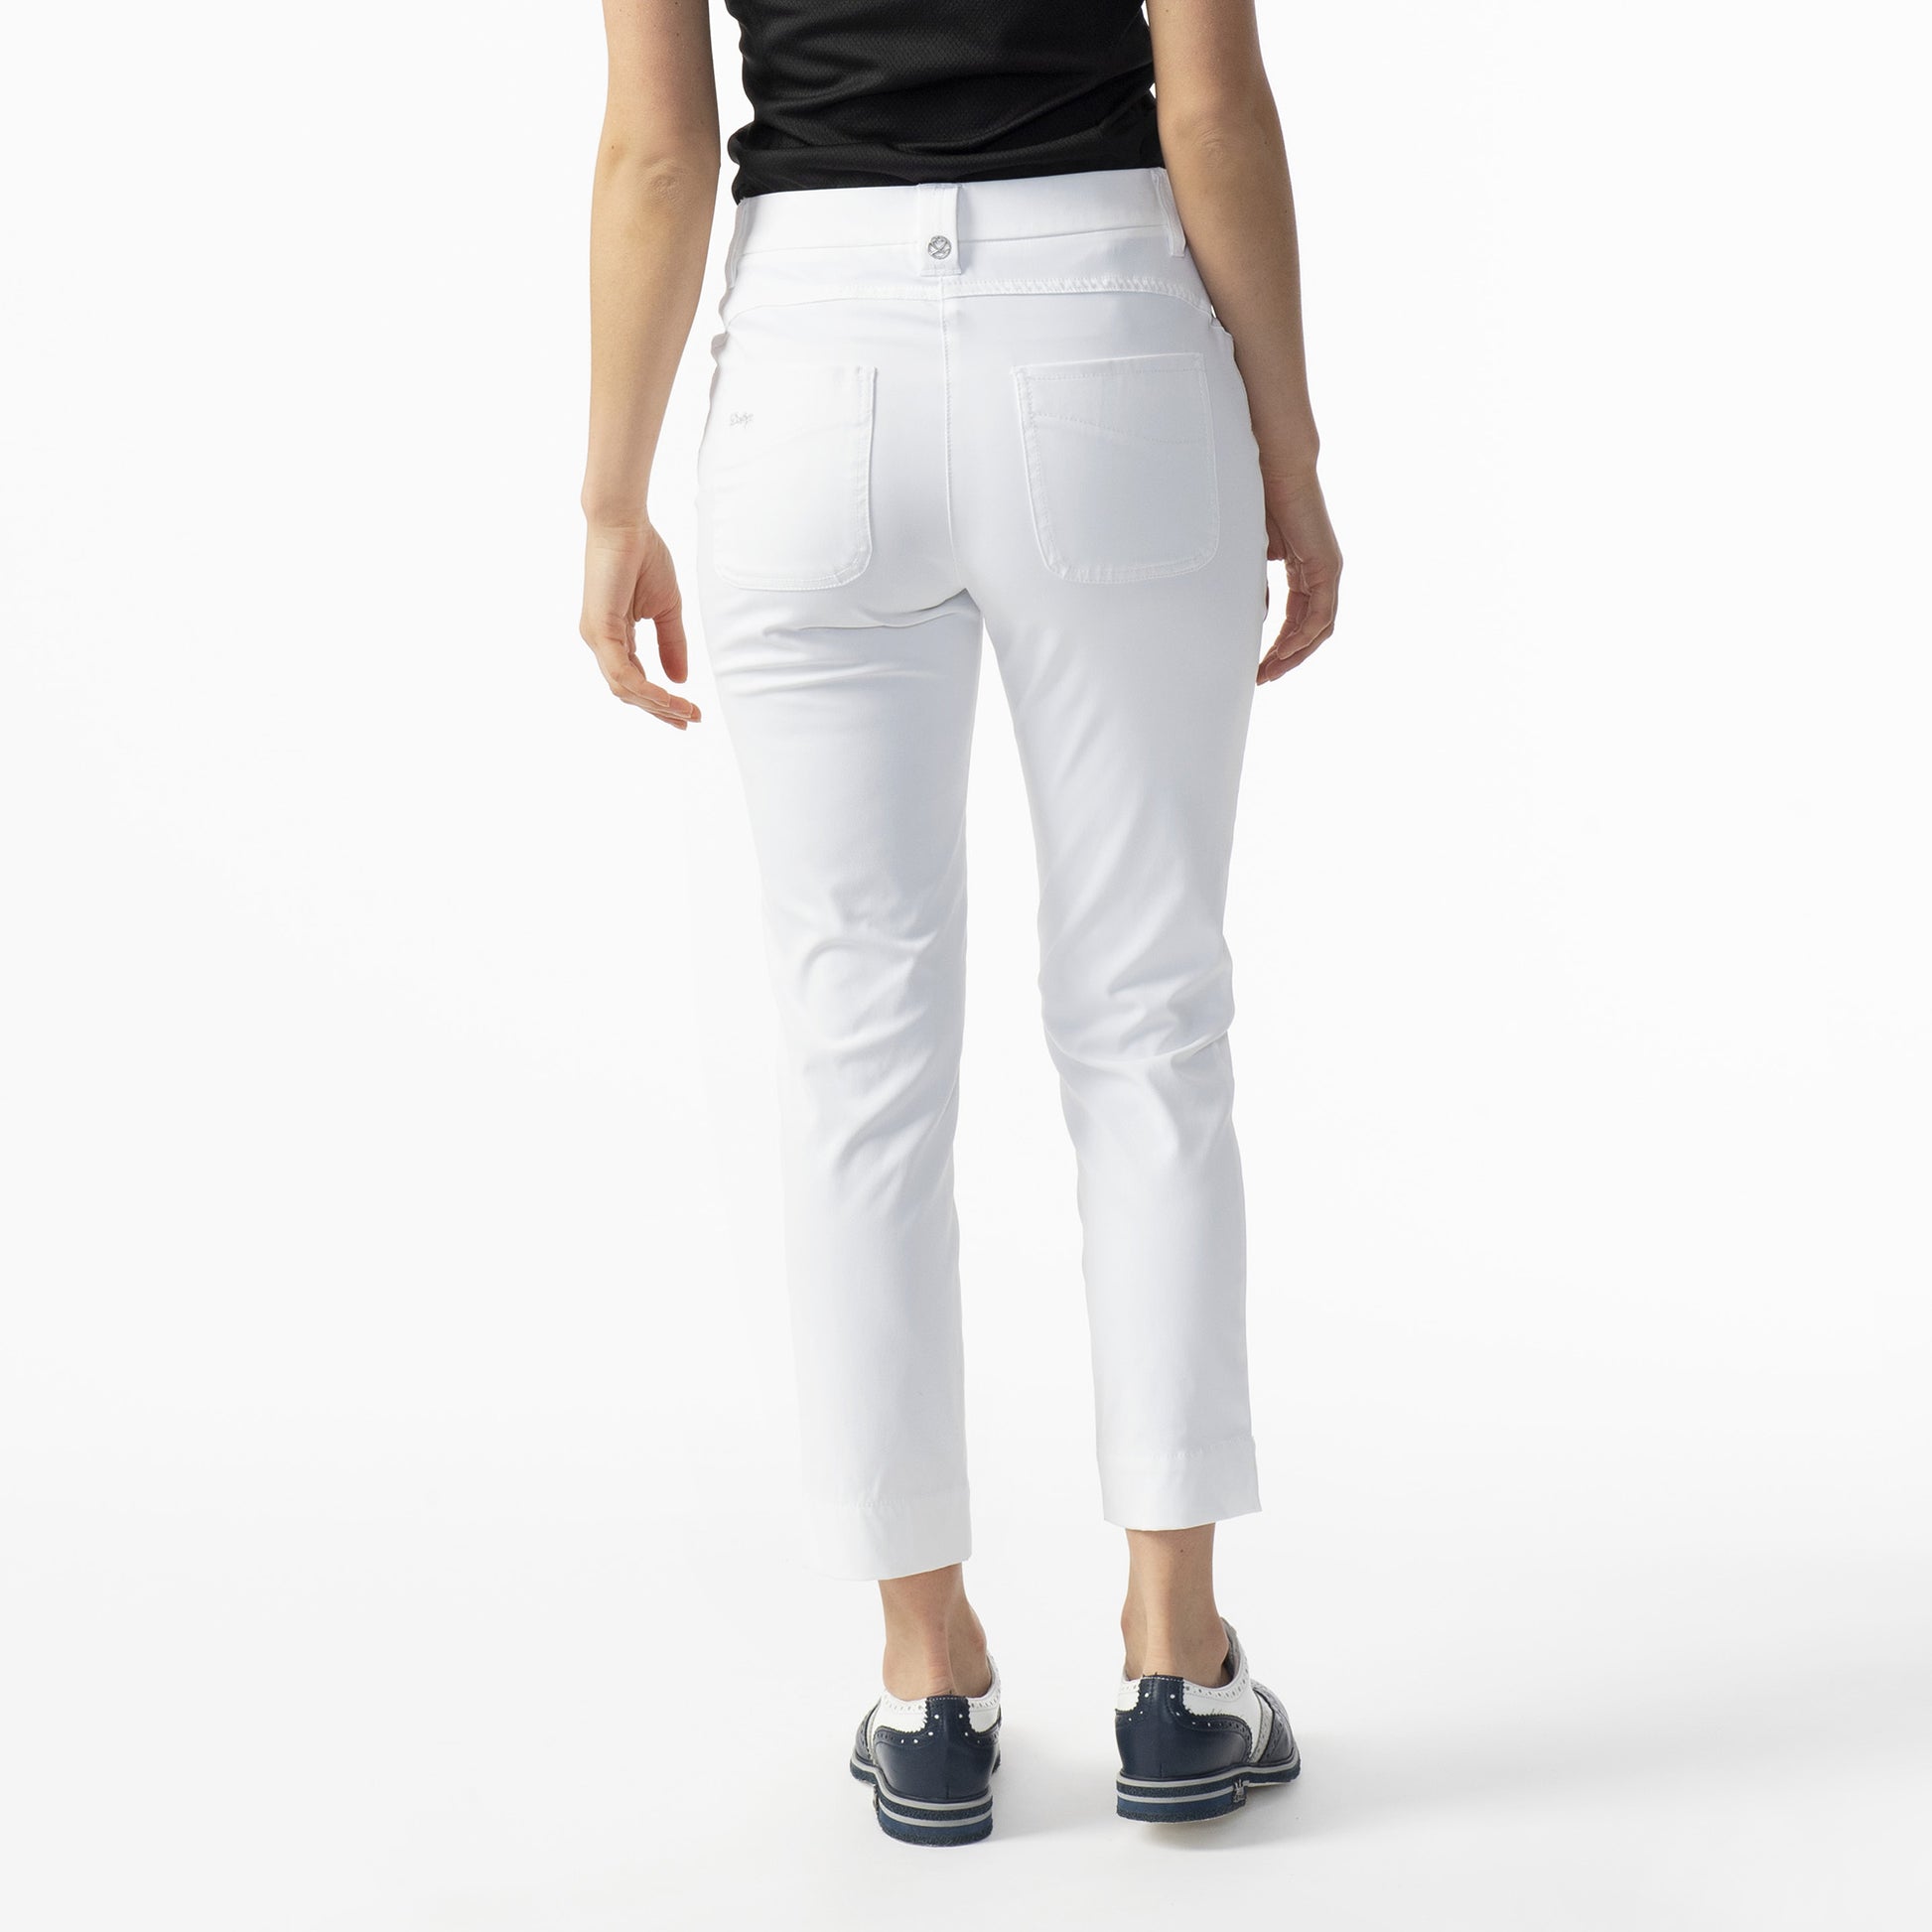 Daily Sports Ladies 7/8 Trousers in White